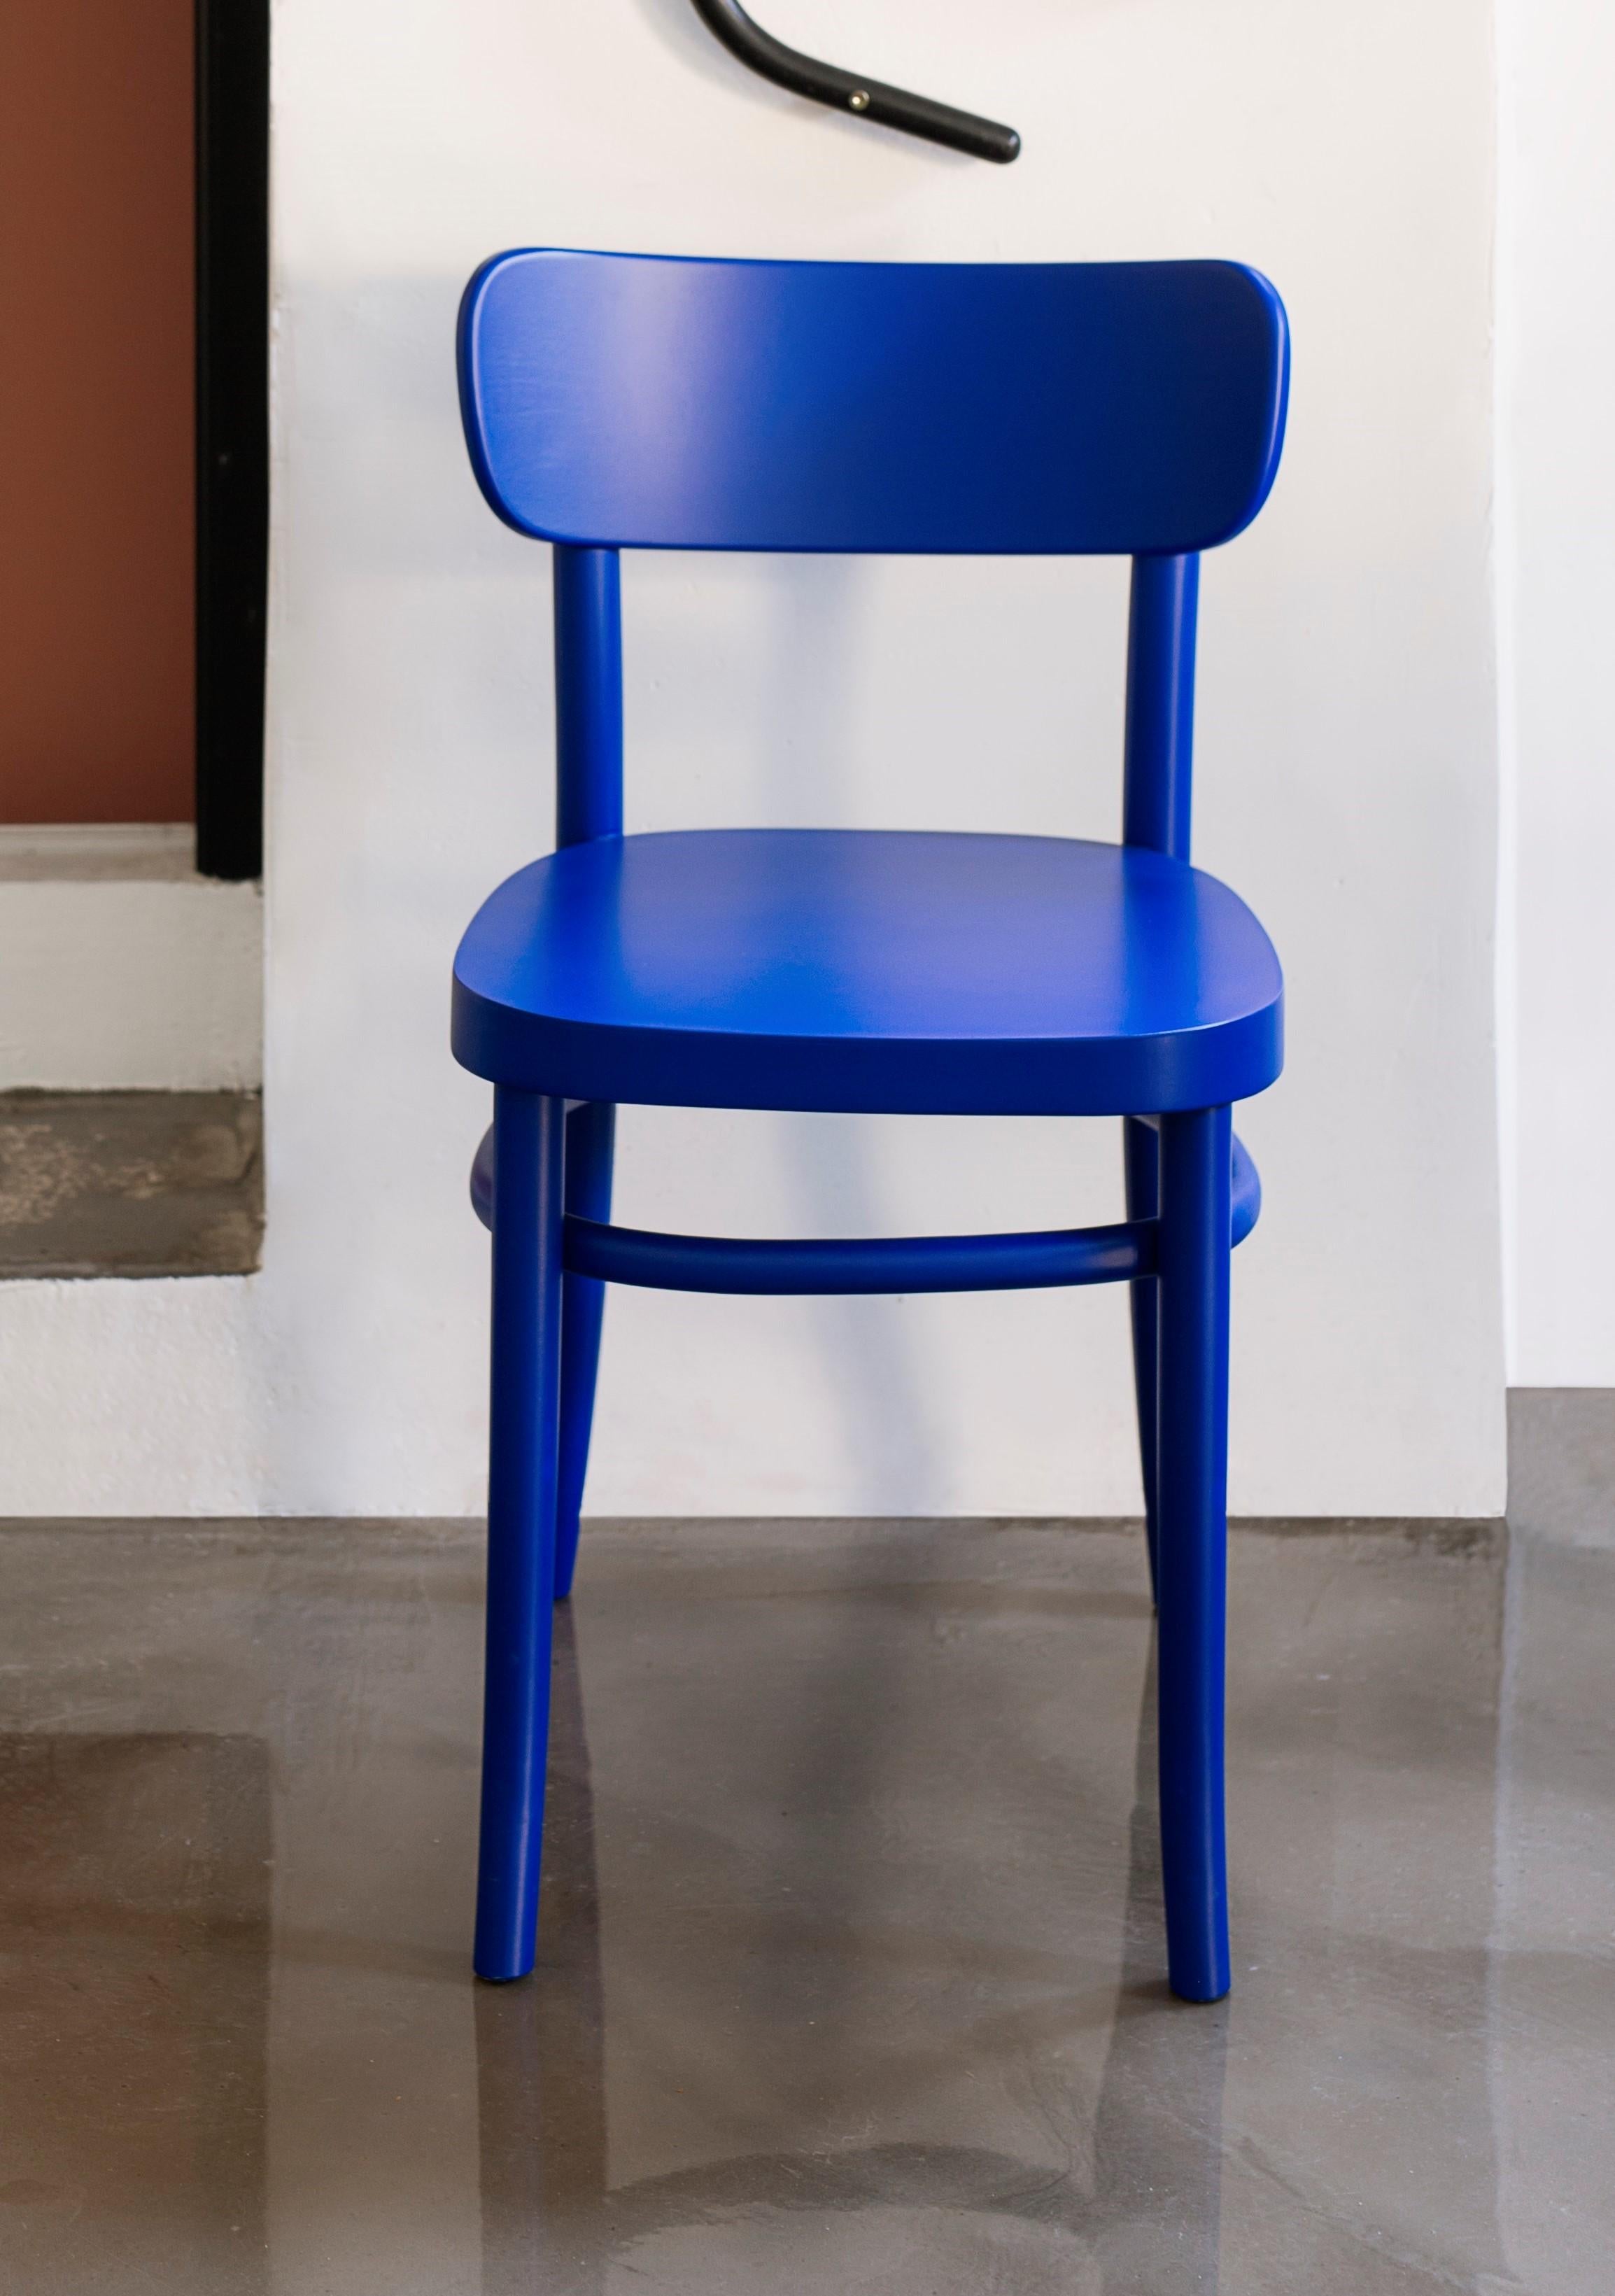 Blue MZO chair by Mazo Design
Dimensions: W 46 x D 50 x H 75 cm
Materials: Beech.

This iconic chair played a leading role in one of the fairy tales of Danish furniture design. However – more curiously – it is also on display at The Workers